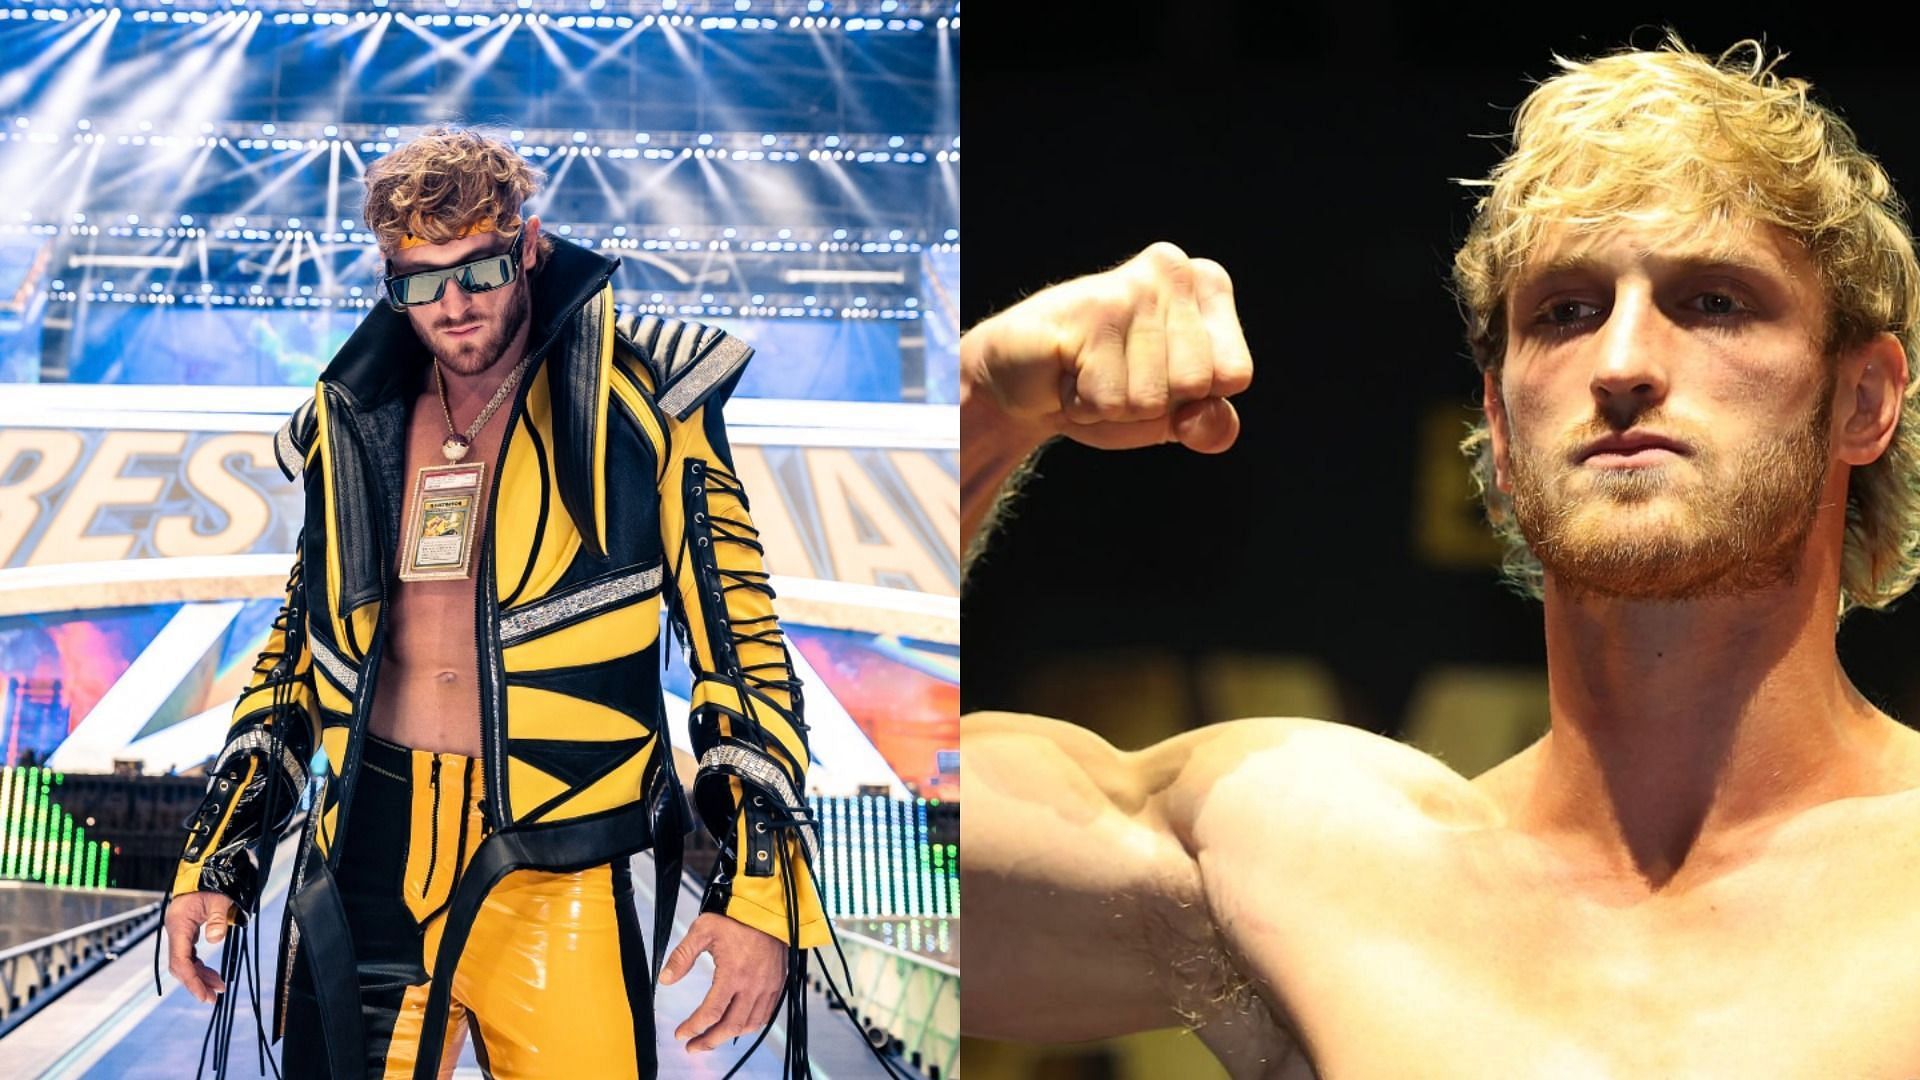 Logan Paul made his WrestleMania debut wearing an ultra-rare Pikachu illustrated card (Image via Logan Paul/Twitter and Cliff Hawkins/Getty Images)